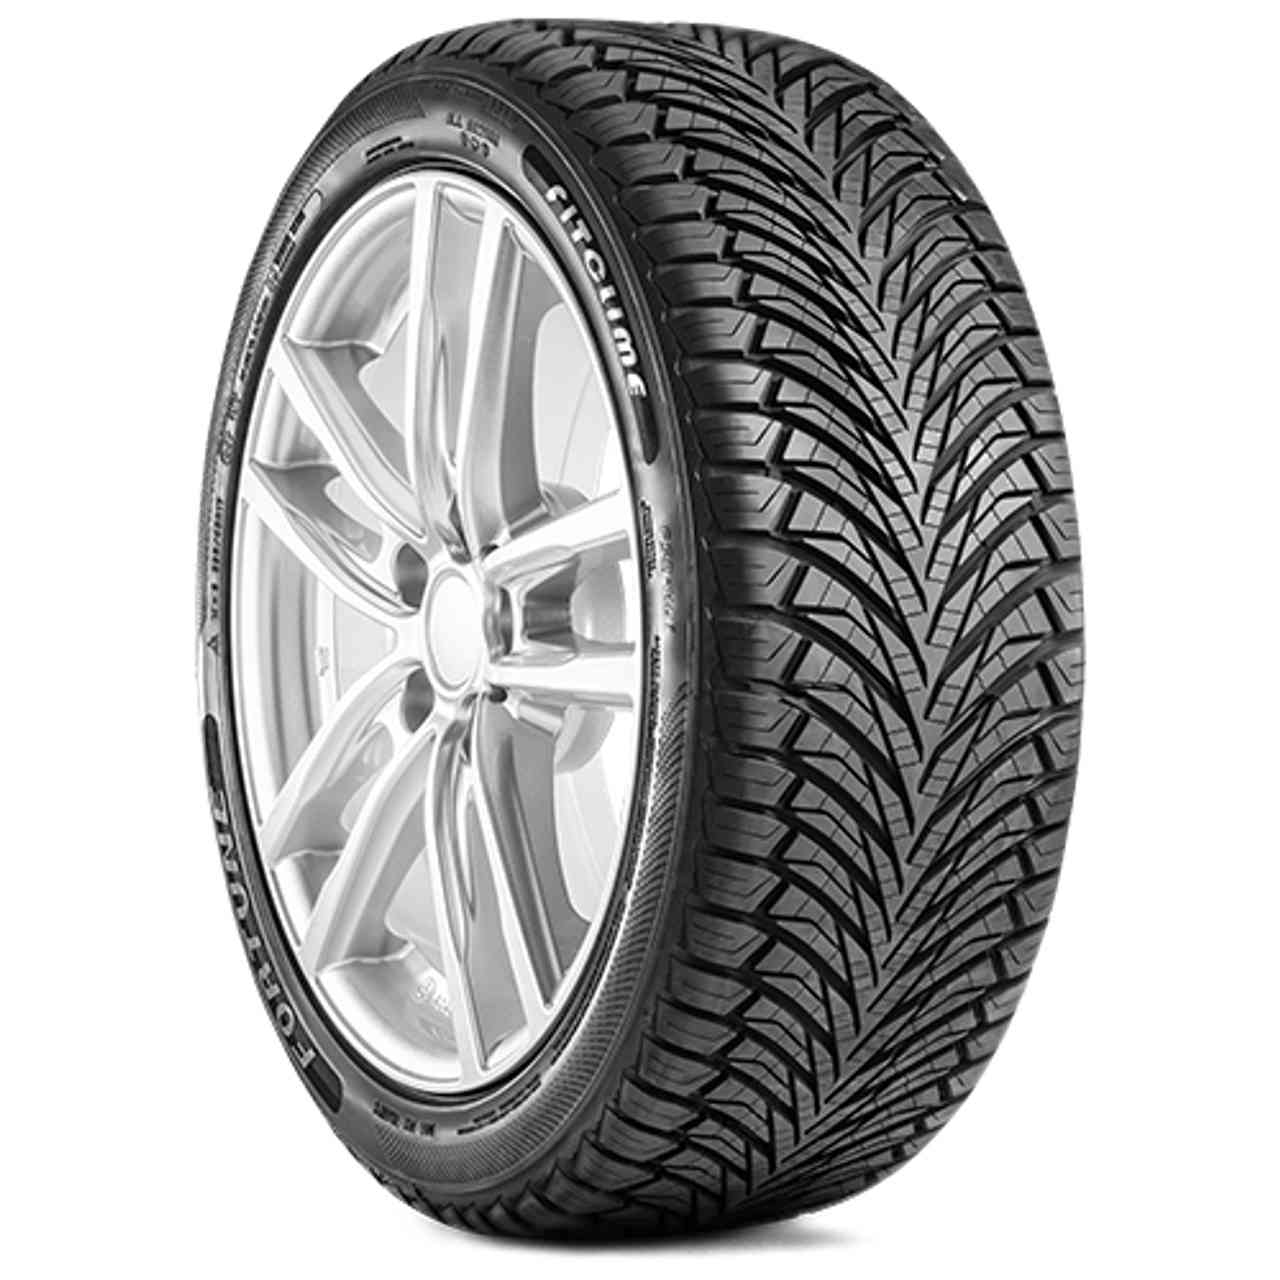 FORTUNE FITCLIME FSR-401 205/55R16 94V BSW XL